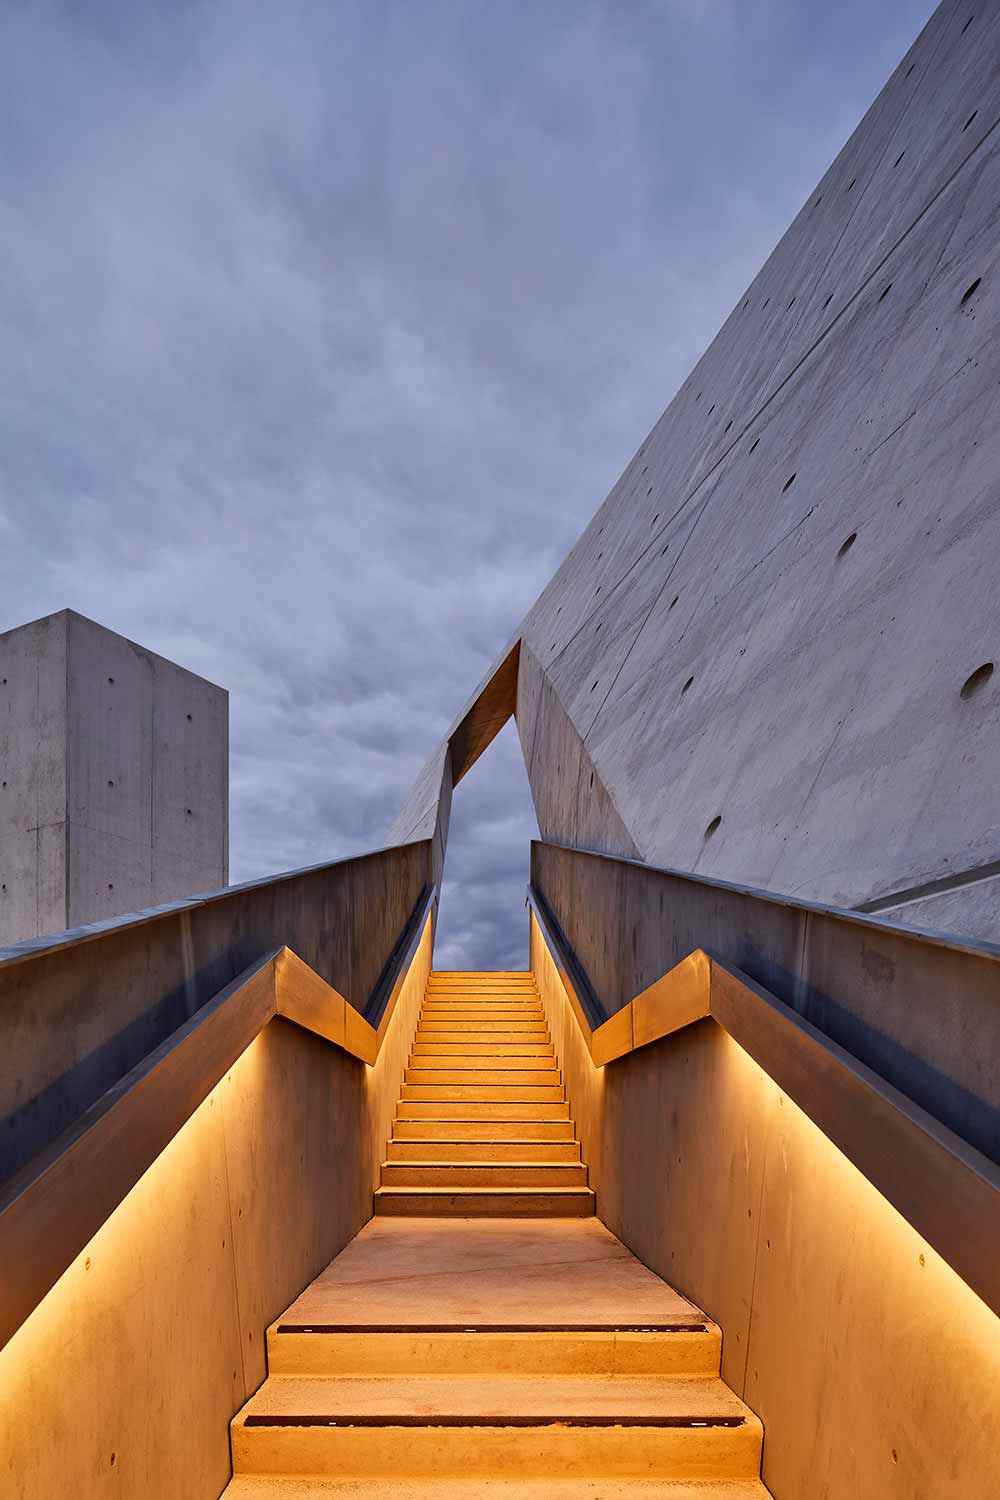 The Canadian National Holocaust Monument (Photo: Doublespace Photography)